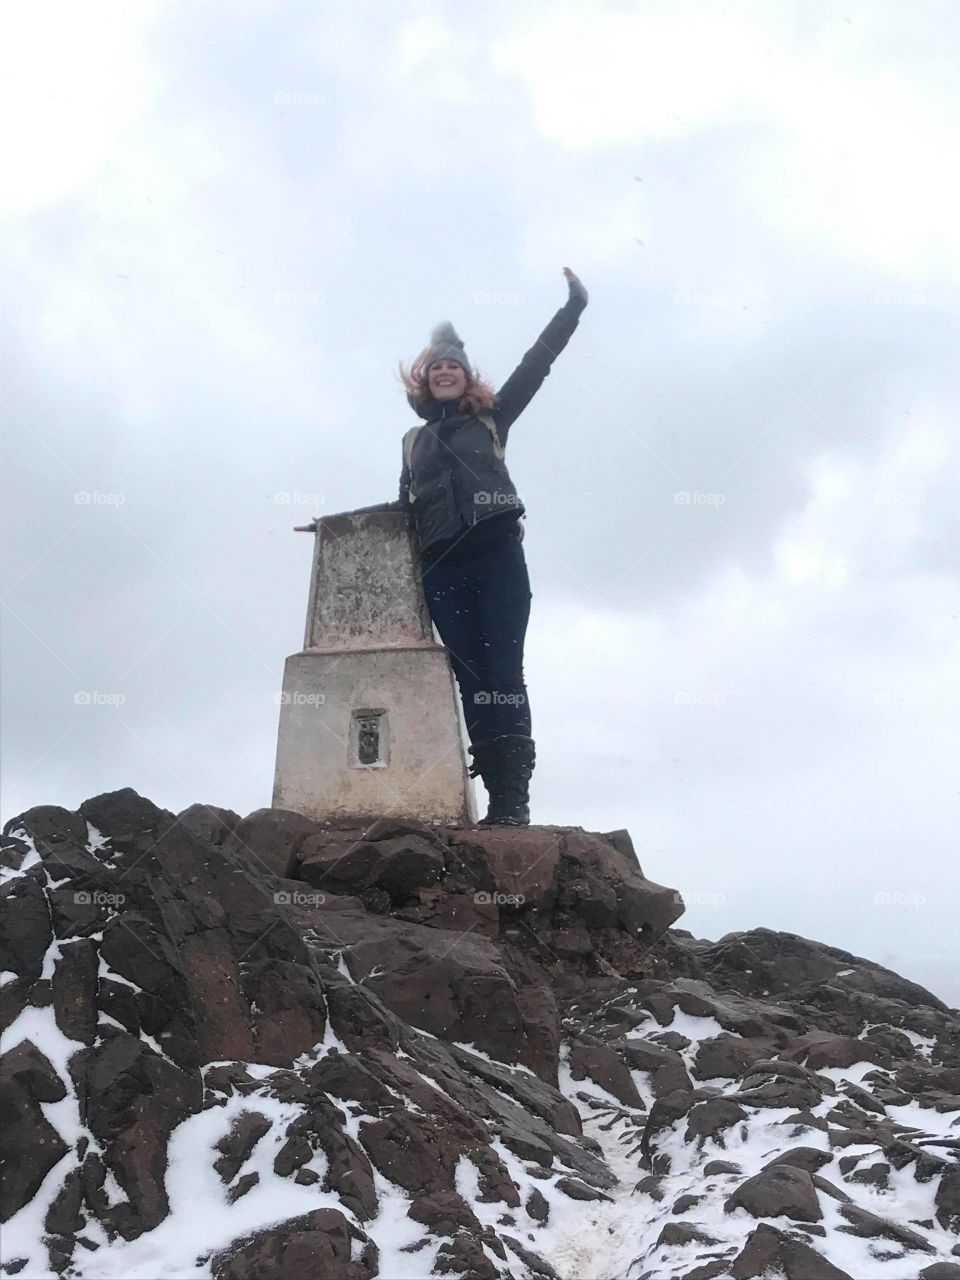 woman on top of mountain in snow celebrating